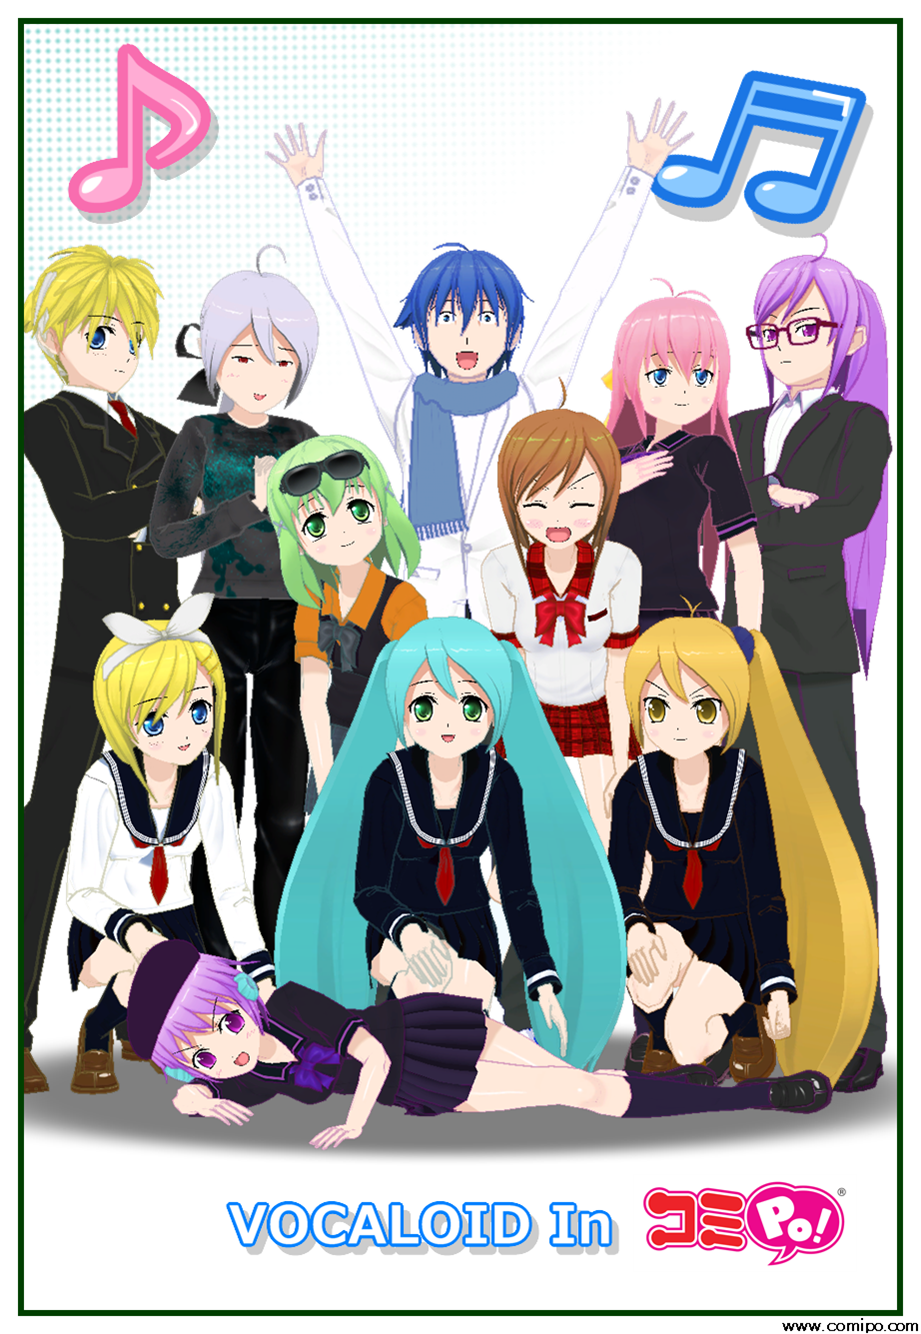 VOCALOID in Comipo!